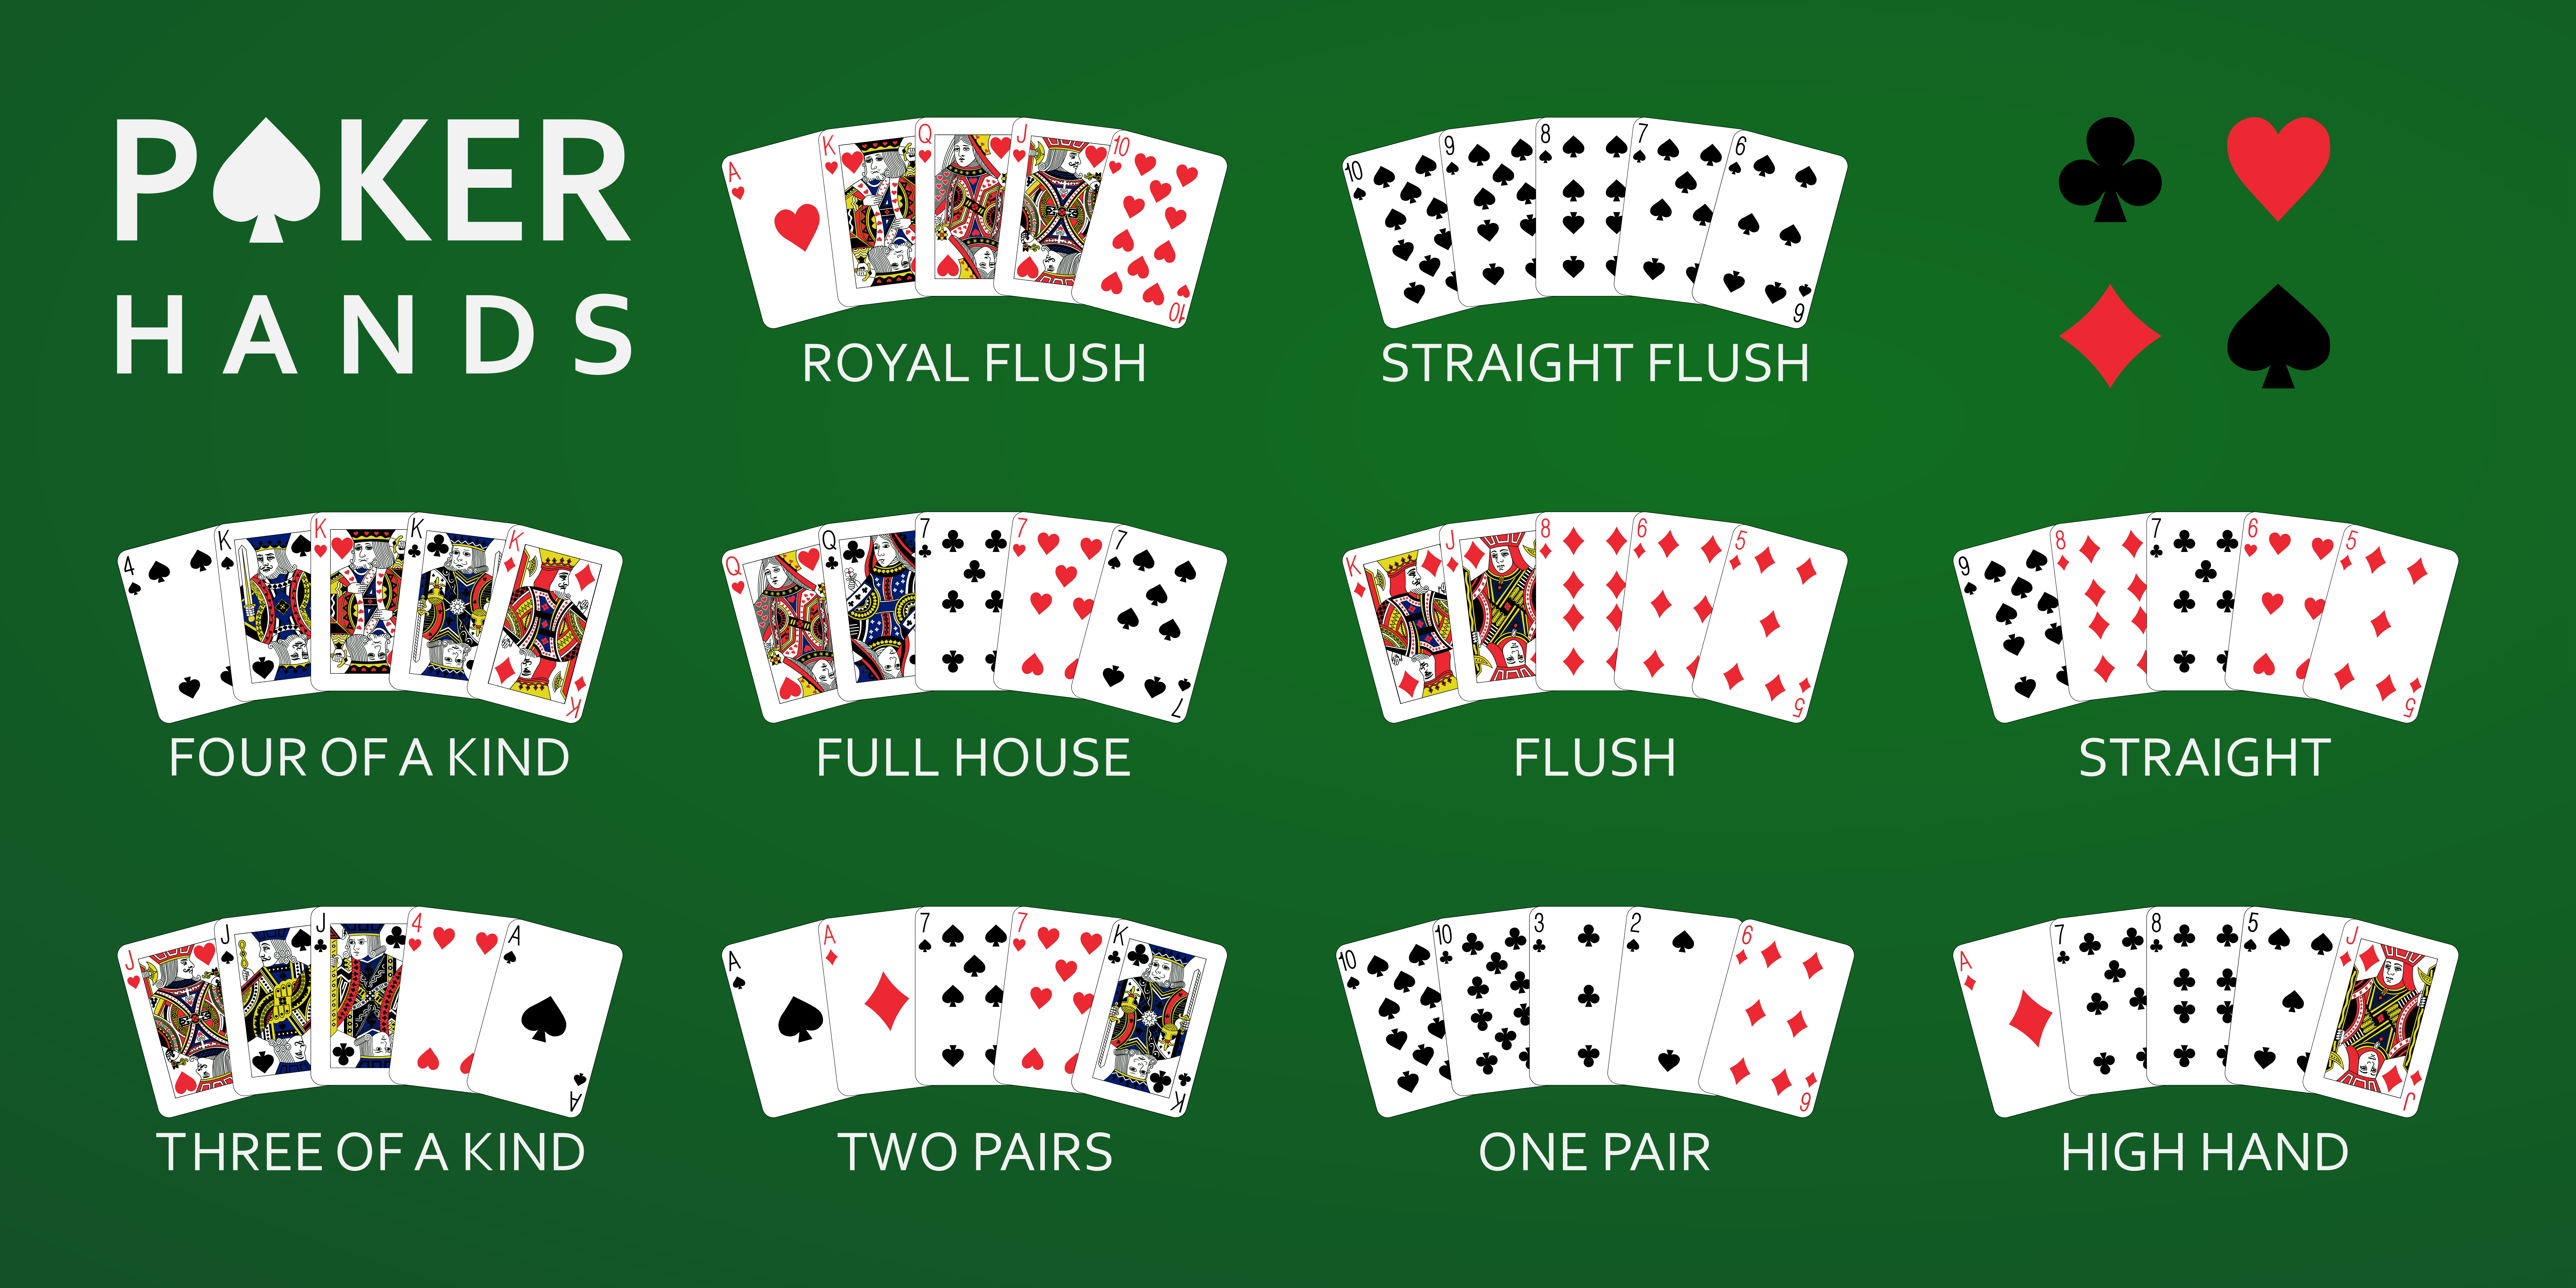 what hand beats a straight in poker